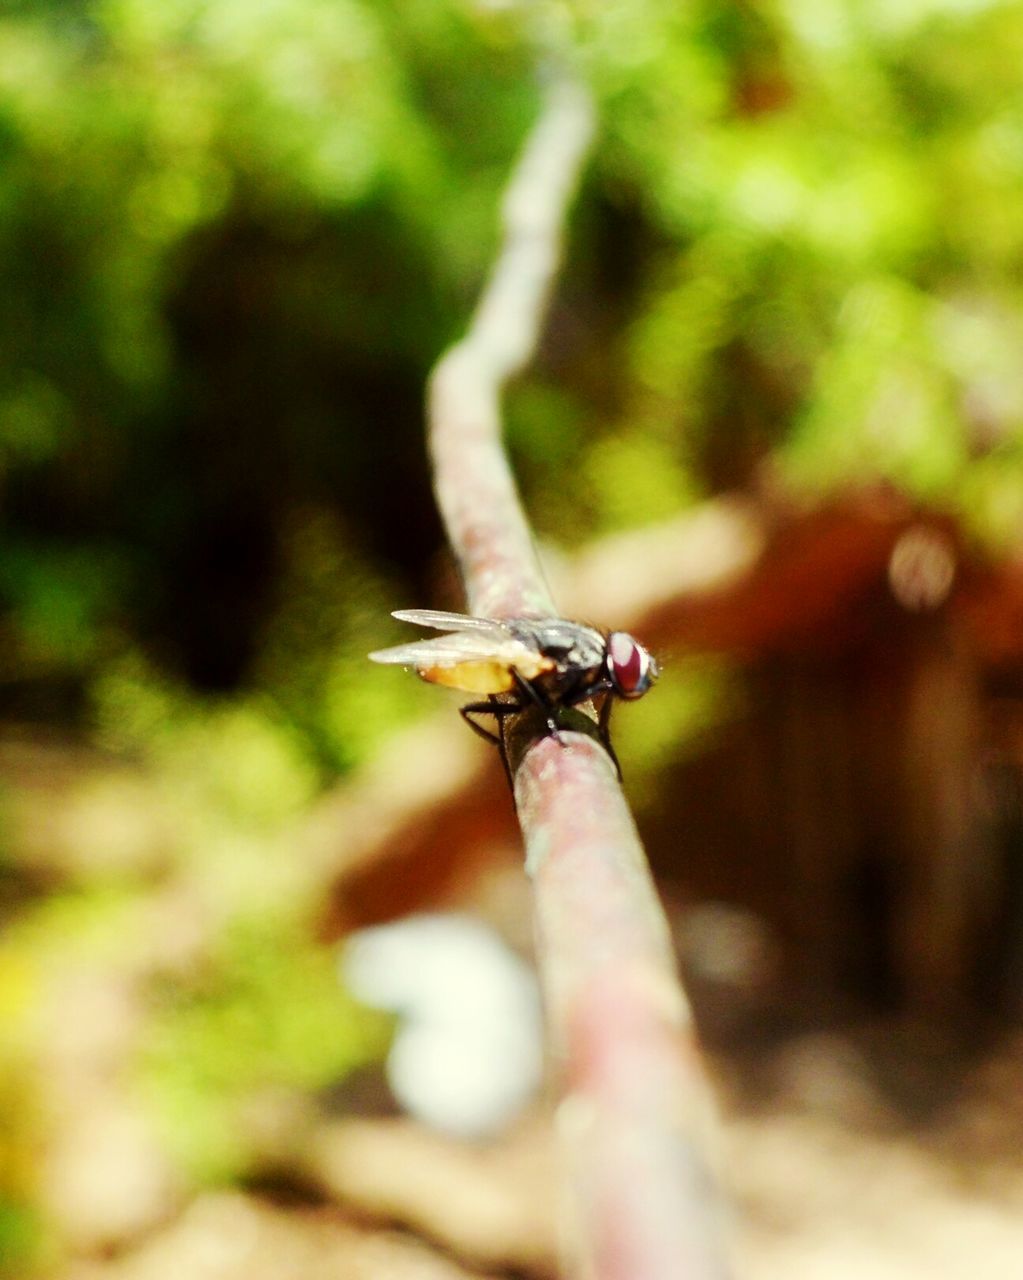 wildlife, insect, one animal, animals in the wild, person, zoology, dragonfly, close-up, holding, focus on foreground, full length, perching, human finger, selective focus, invertebrate, animal wing, animal eye, macro, flying, nature, outdoors